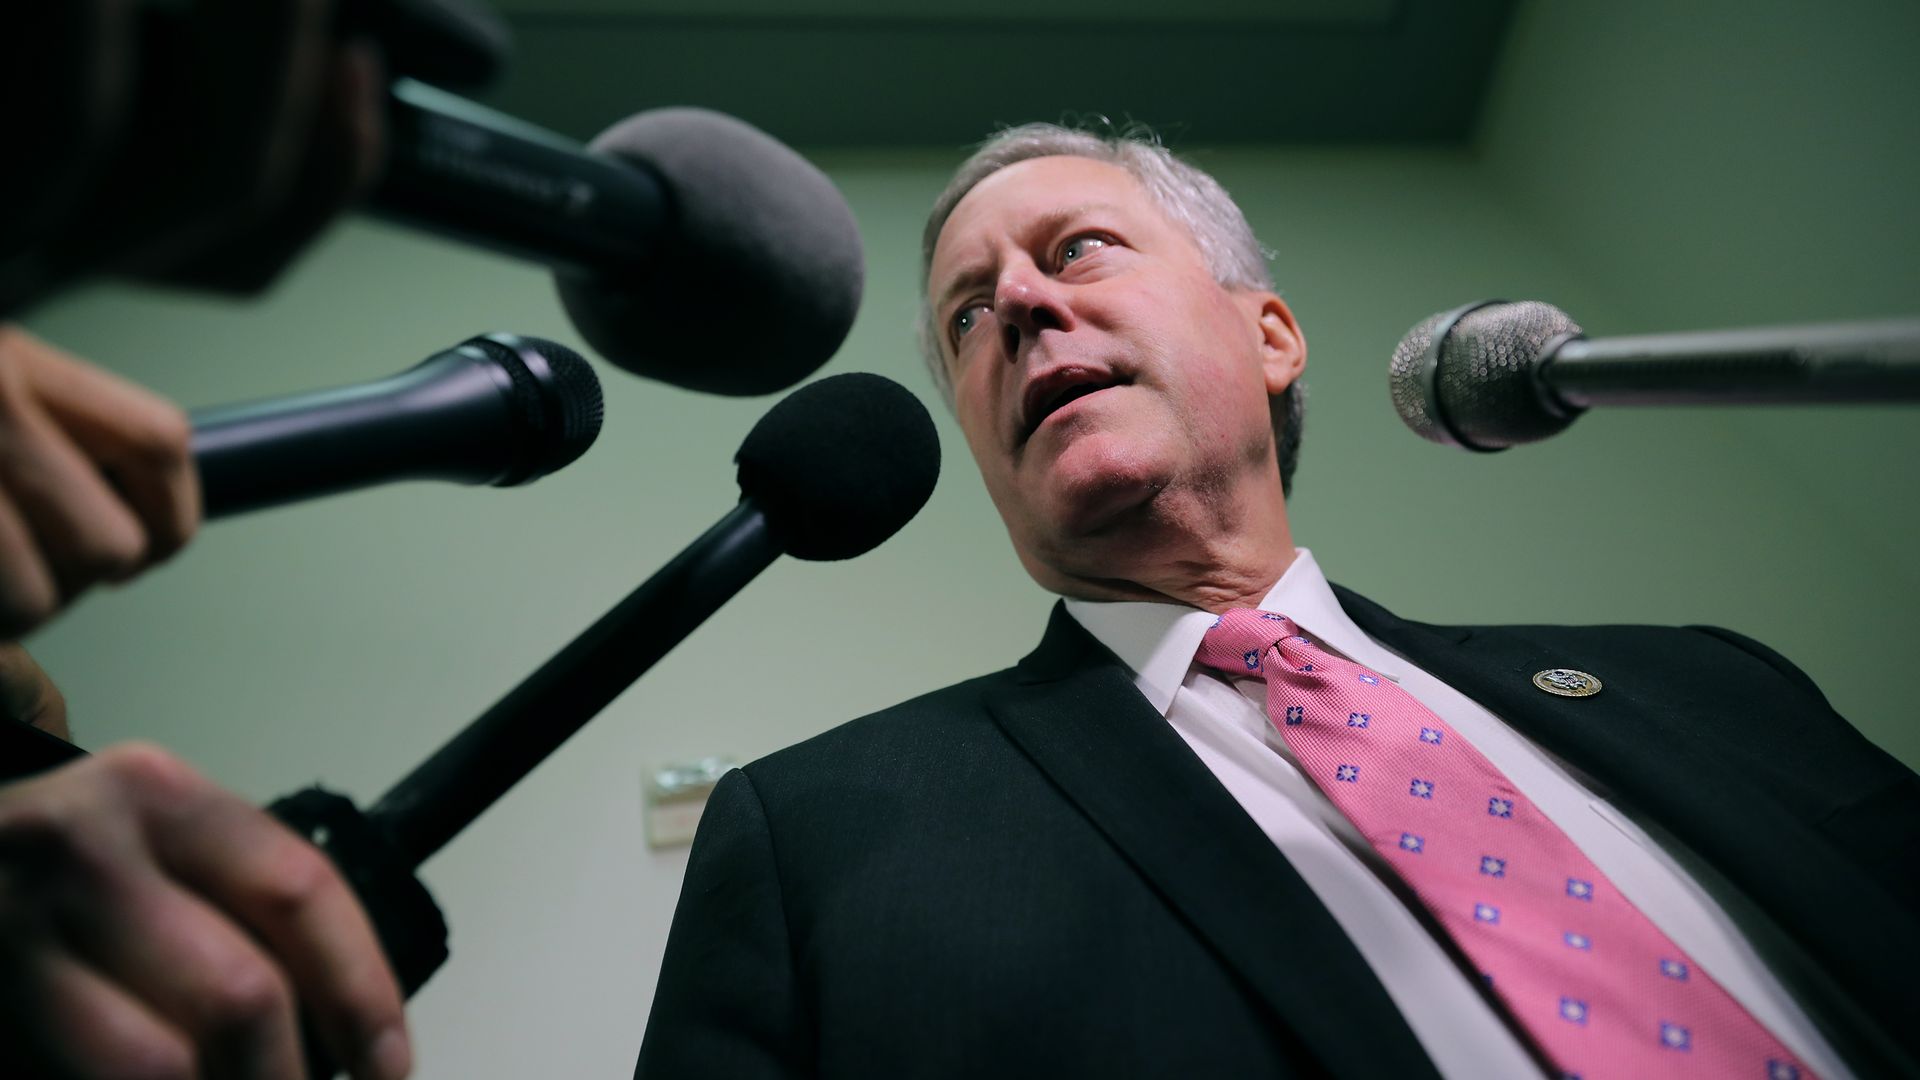 Mark Meadows speaks into a gaggle of press microphones.